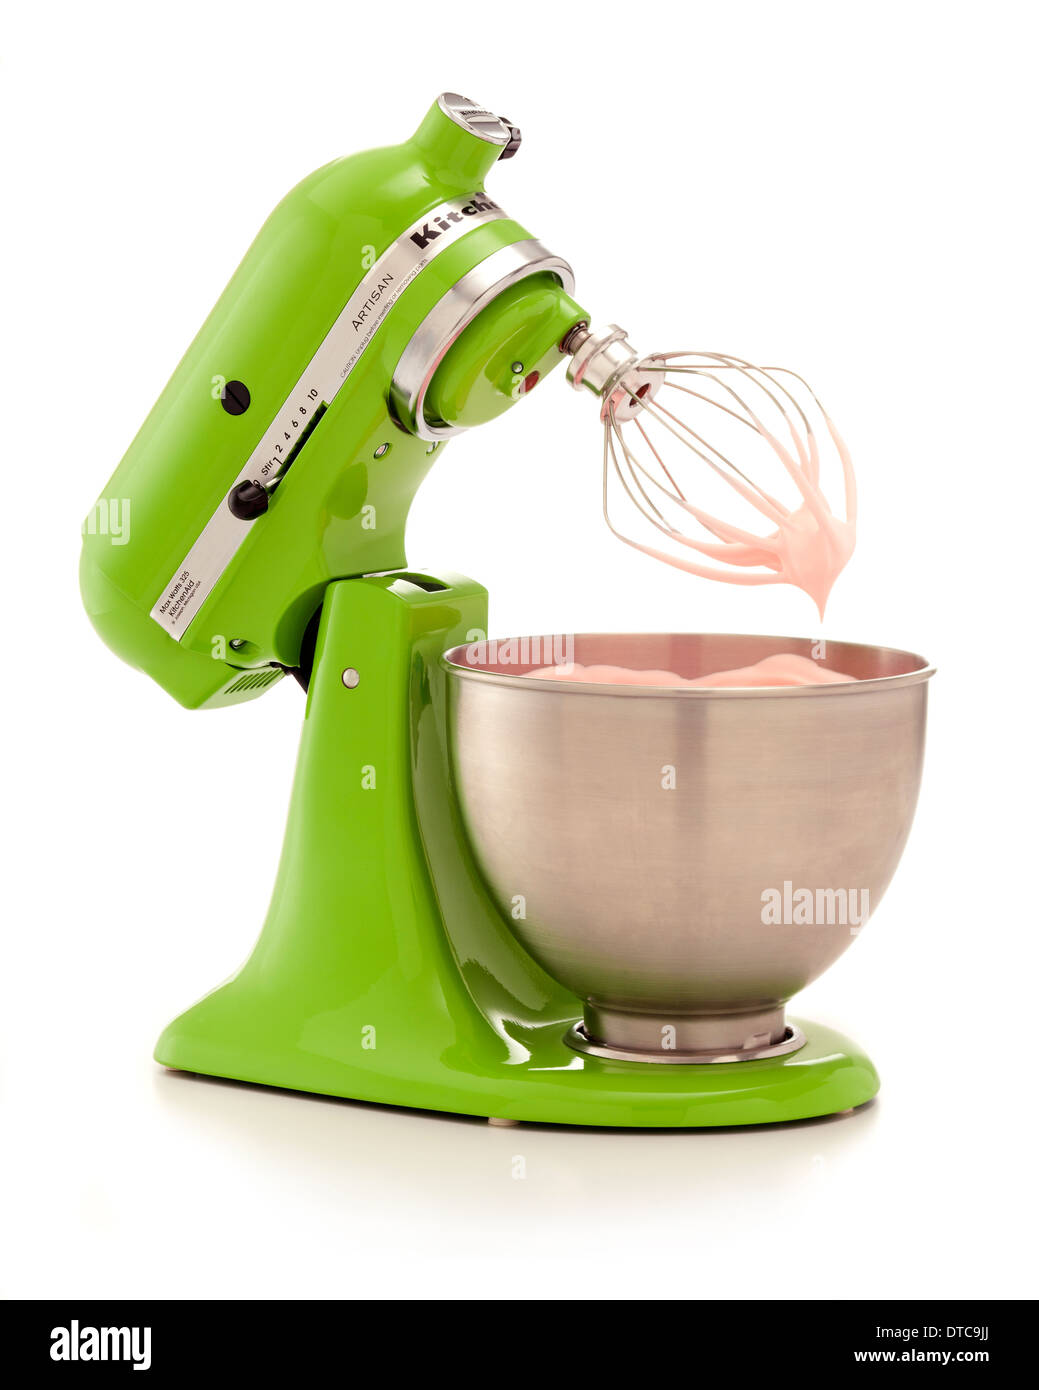 Green kitchenaid mixer with a bowl of pink icing that was just made on a white background Stock Photo